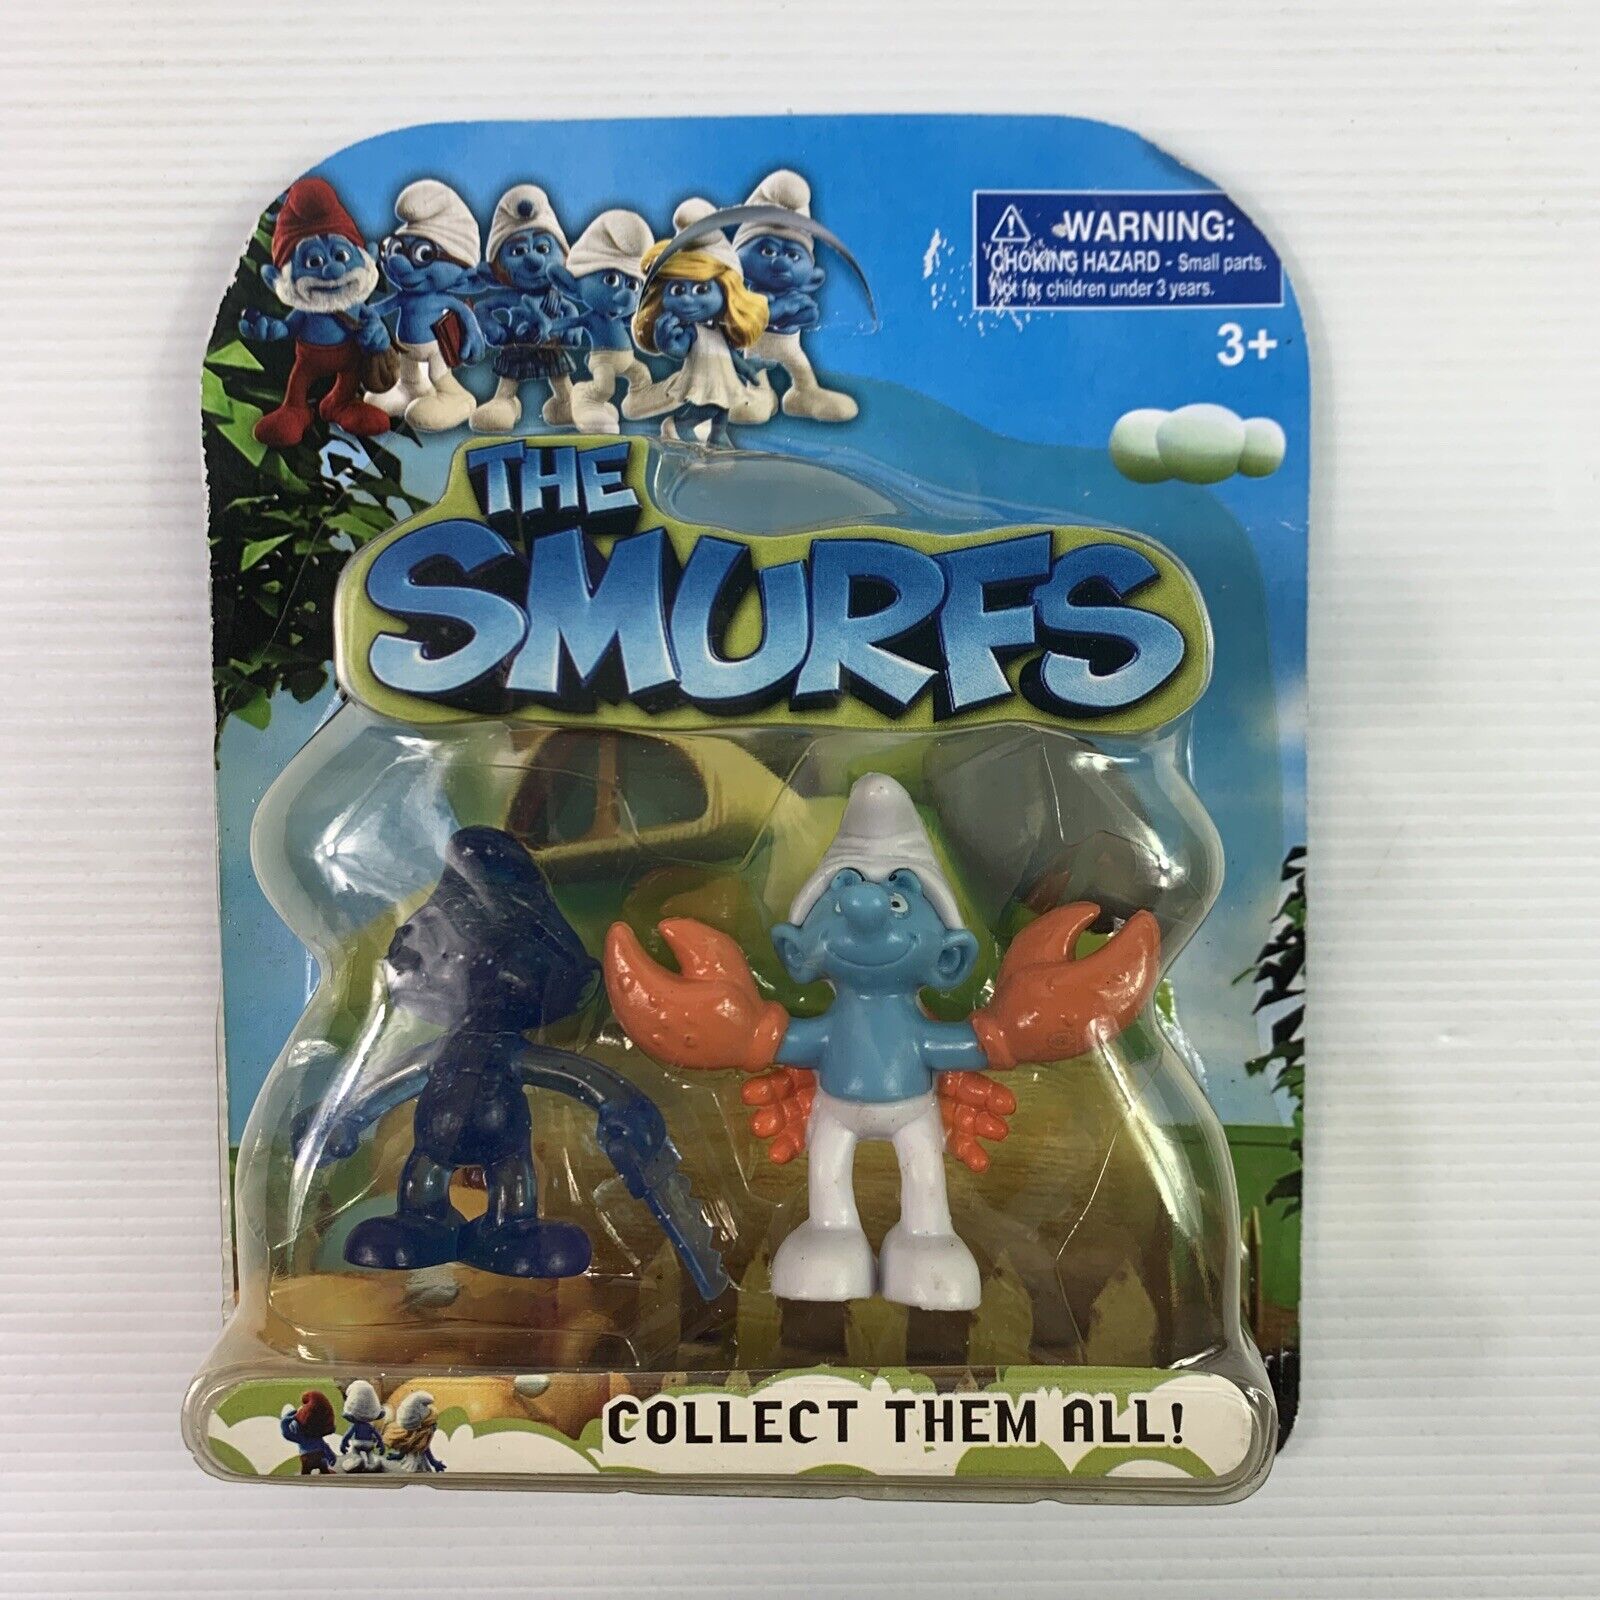 The SMURFS Astrology Zodiac 2010 - 20723 Cancer - The Crab - RARE In Box NEW